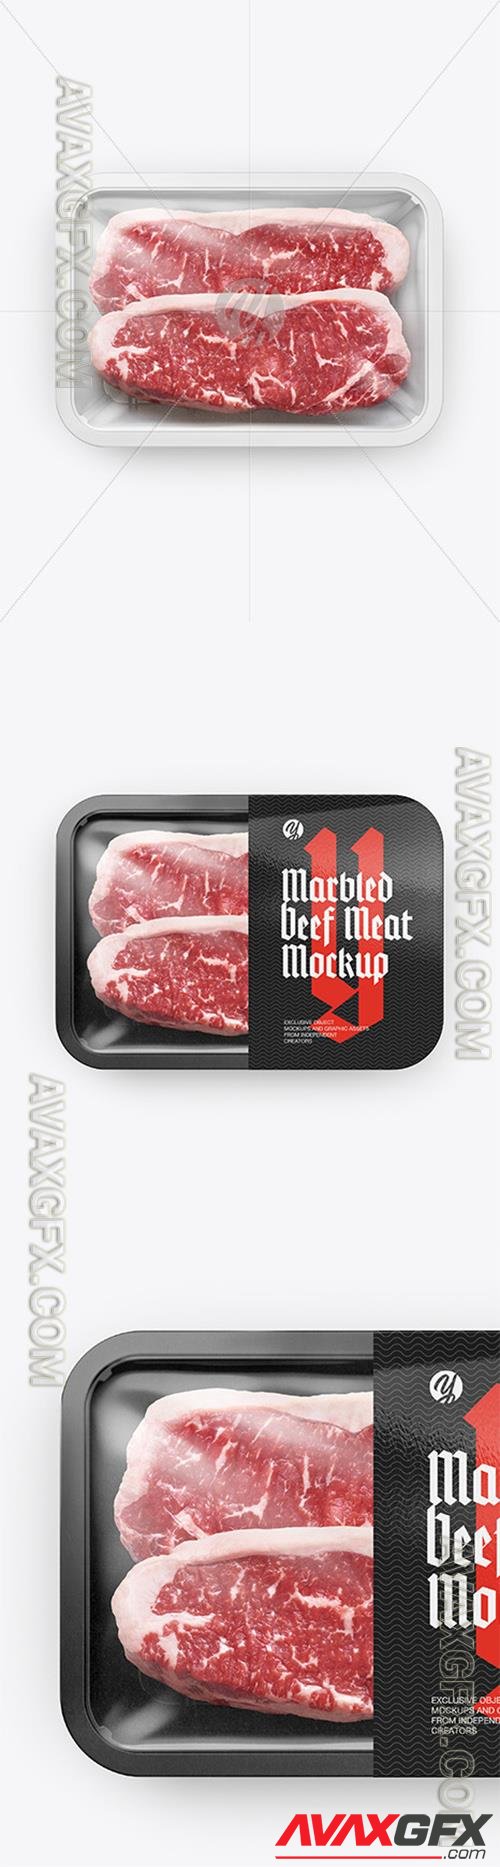 Plastic Tray With Marbled Beef Mockup 89484 TIF